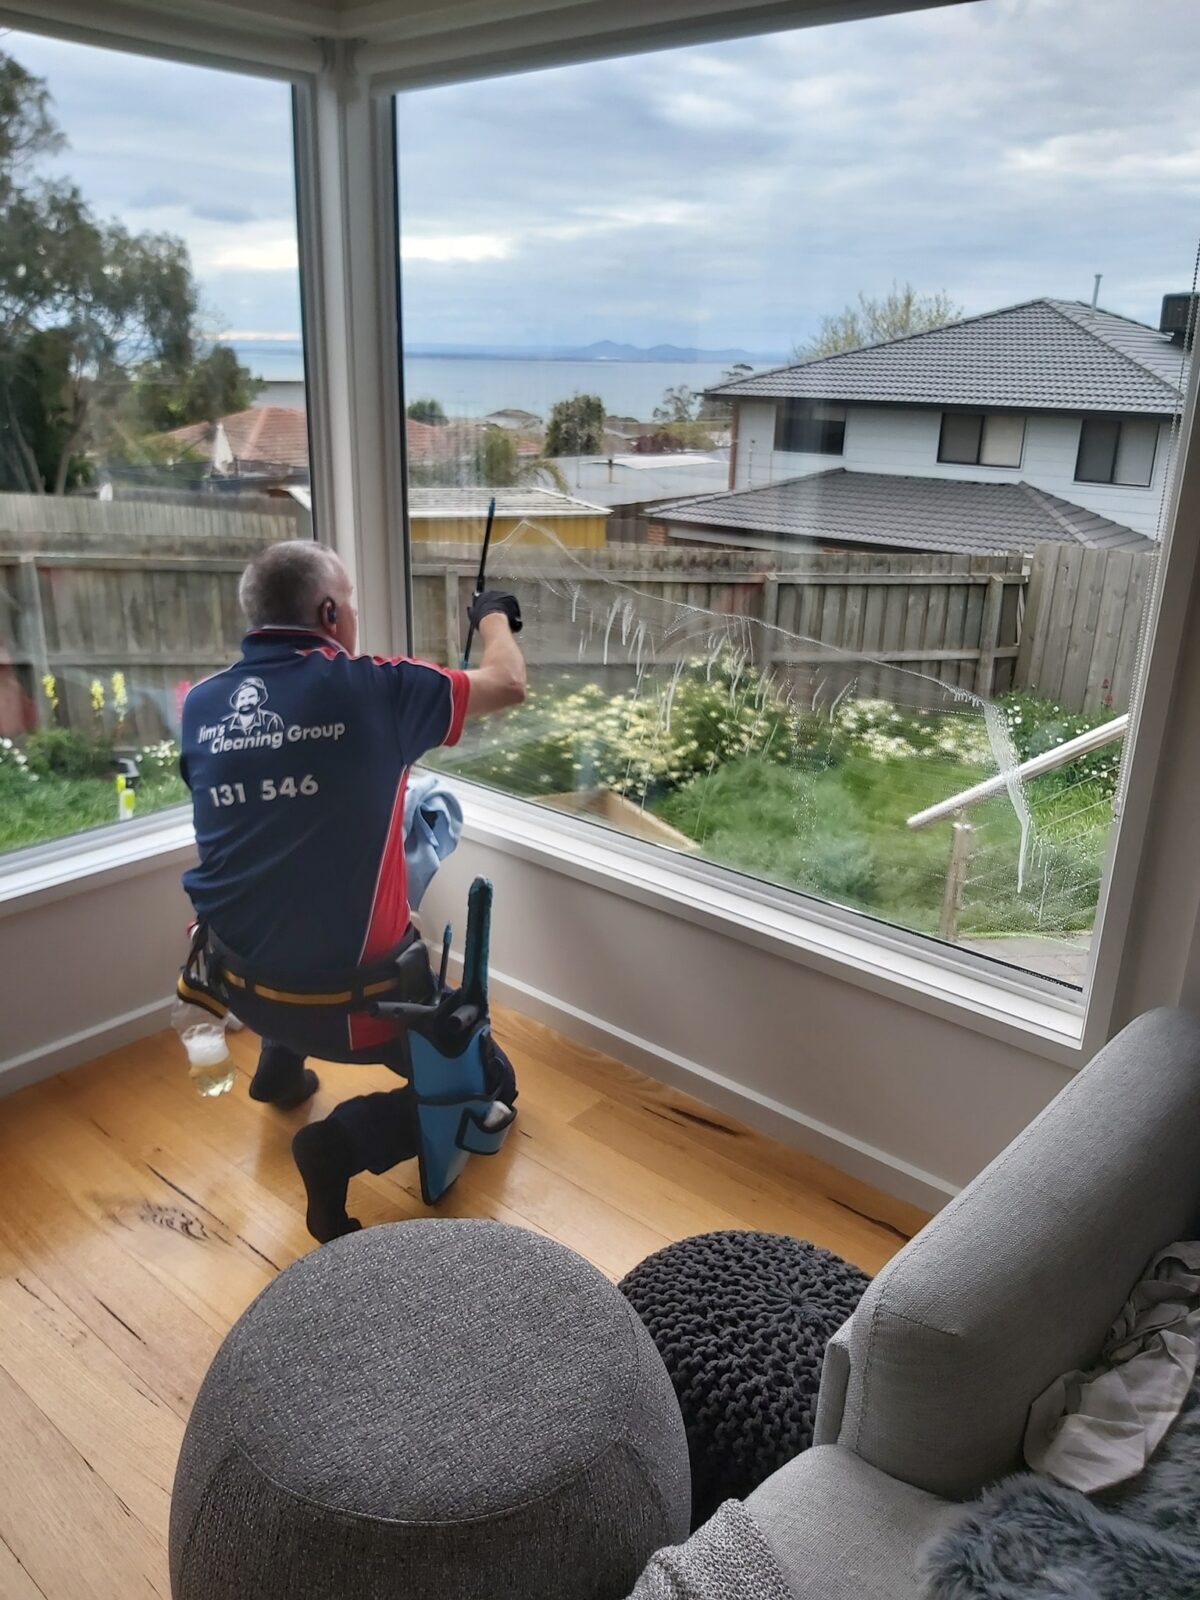 Jim's Residential Window Cleaning - Call 131 546